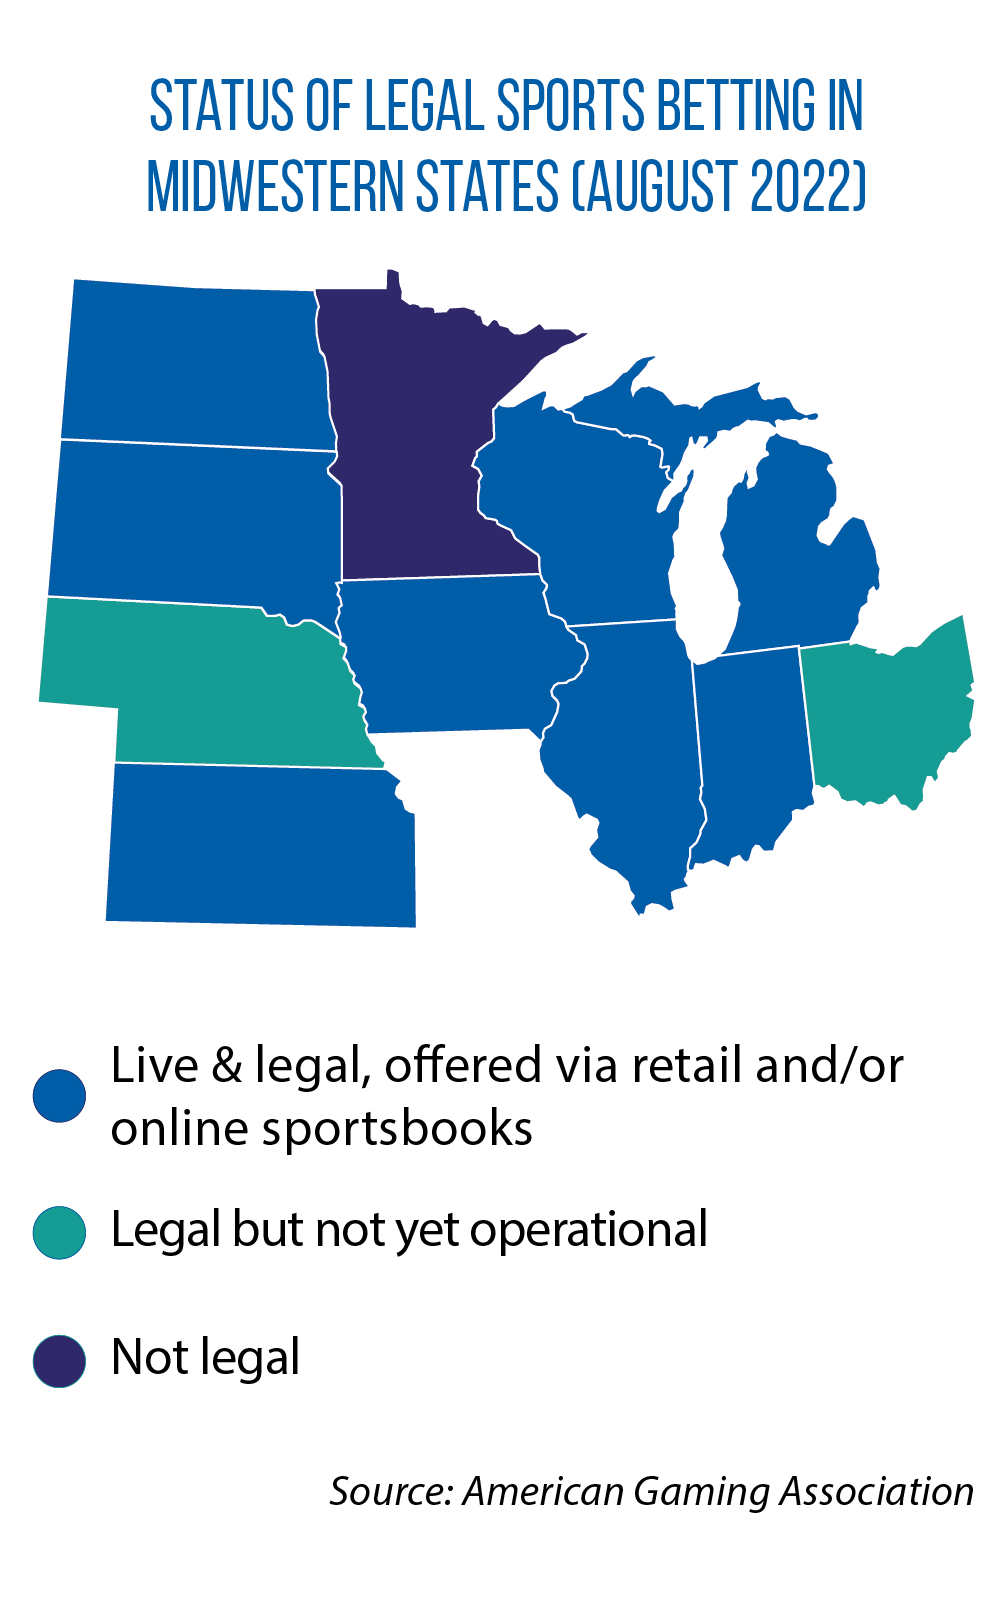 Map showing status of legal sports betting in Midwestern states as of August 2022